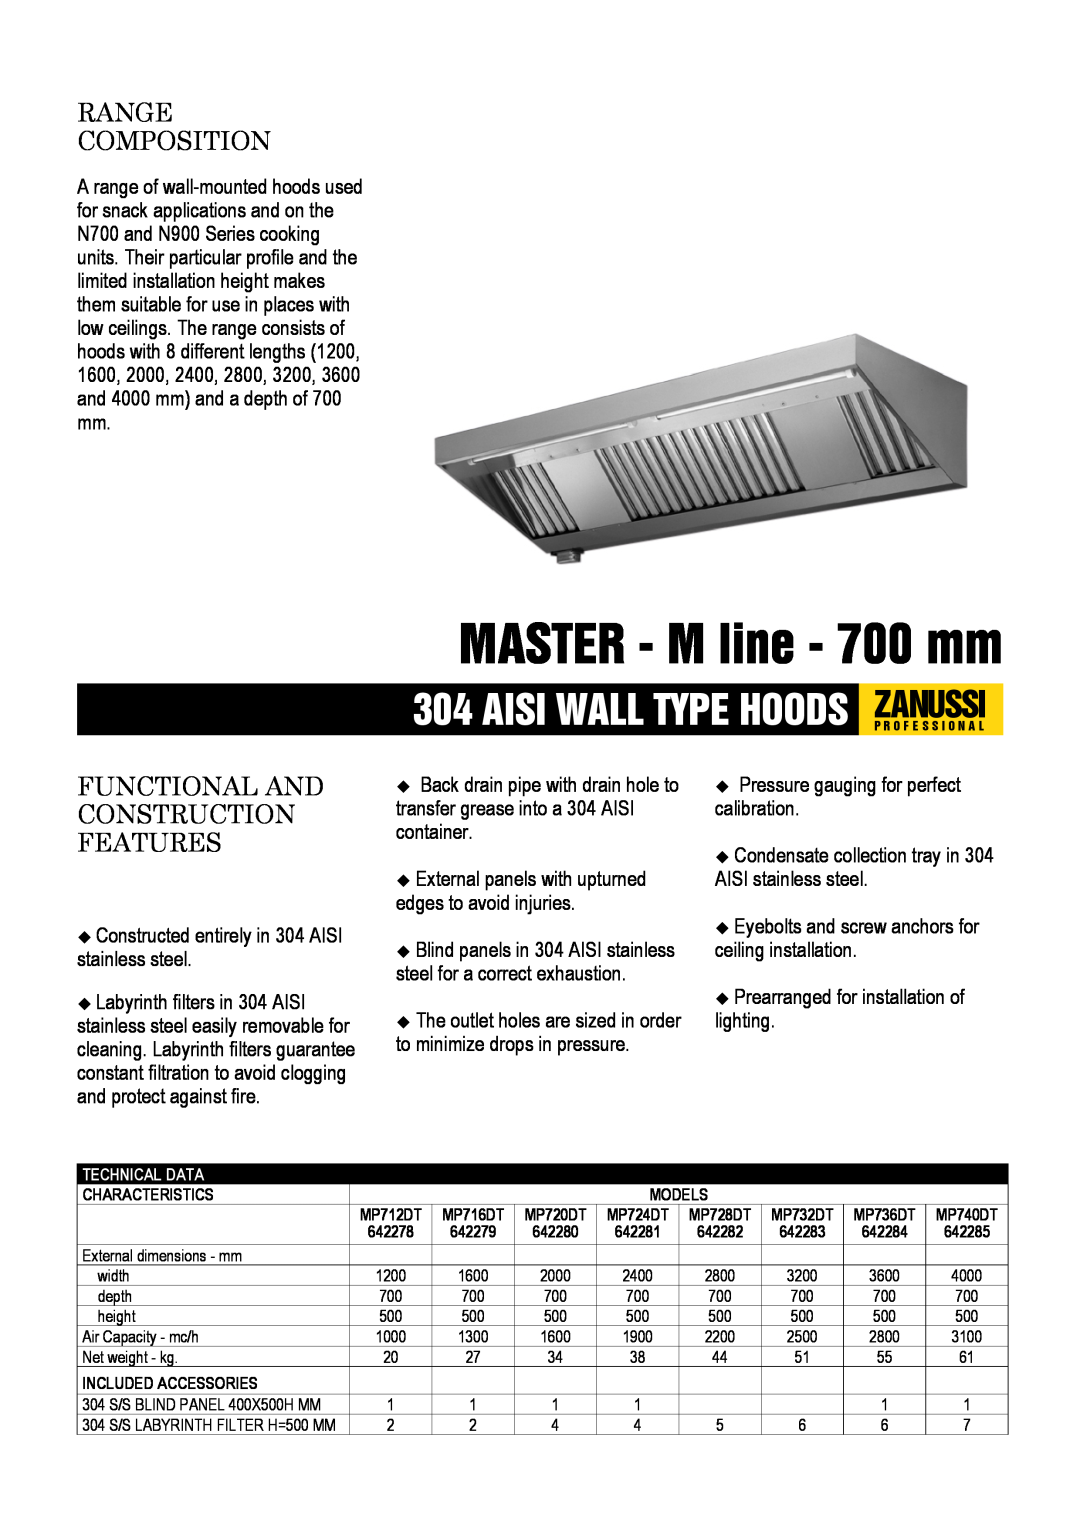 Zanussi 642280, 642283, 642282 dimensions MASTER - M line - 700 mm, Range Composition, Functional And Construction Features 